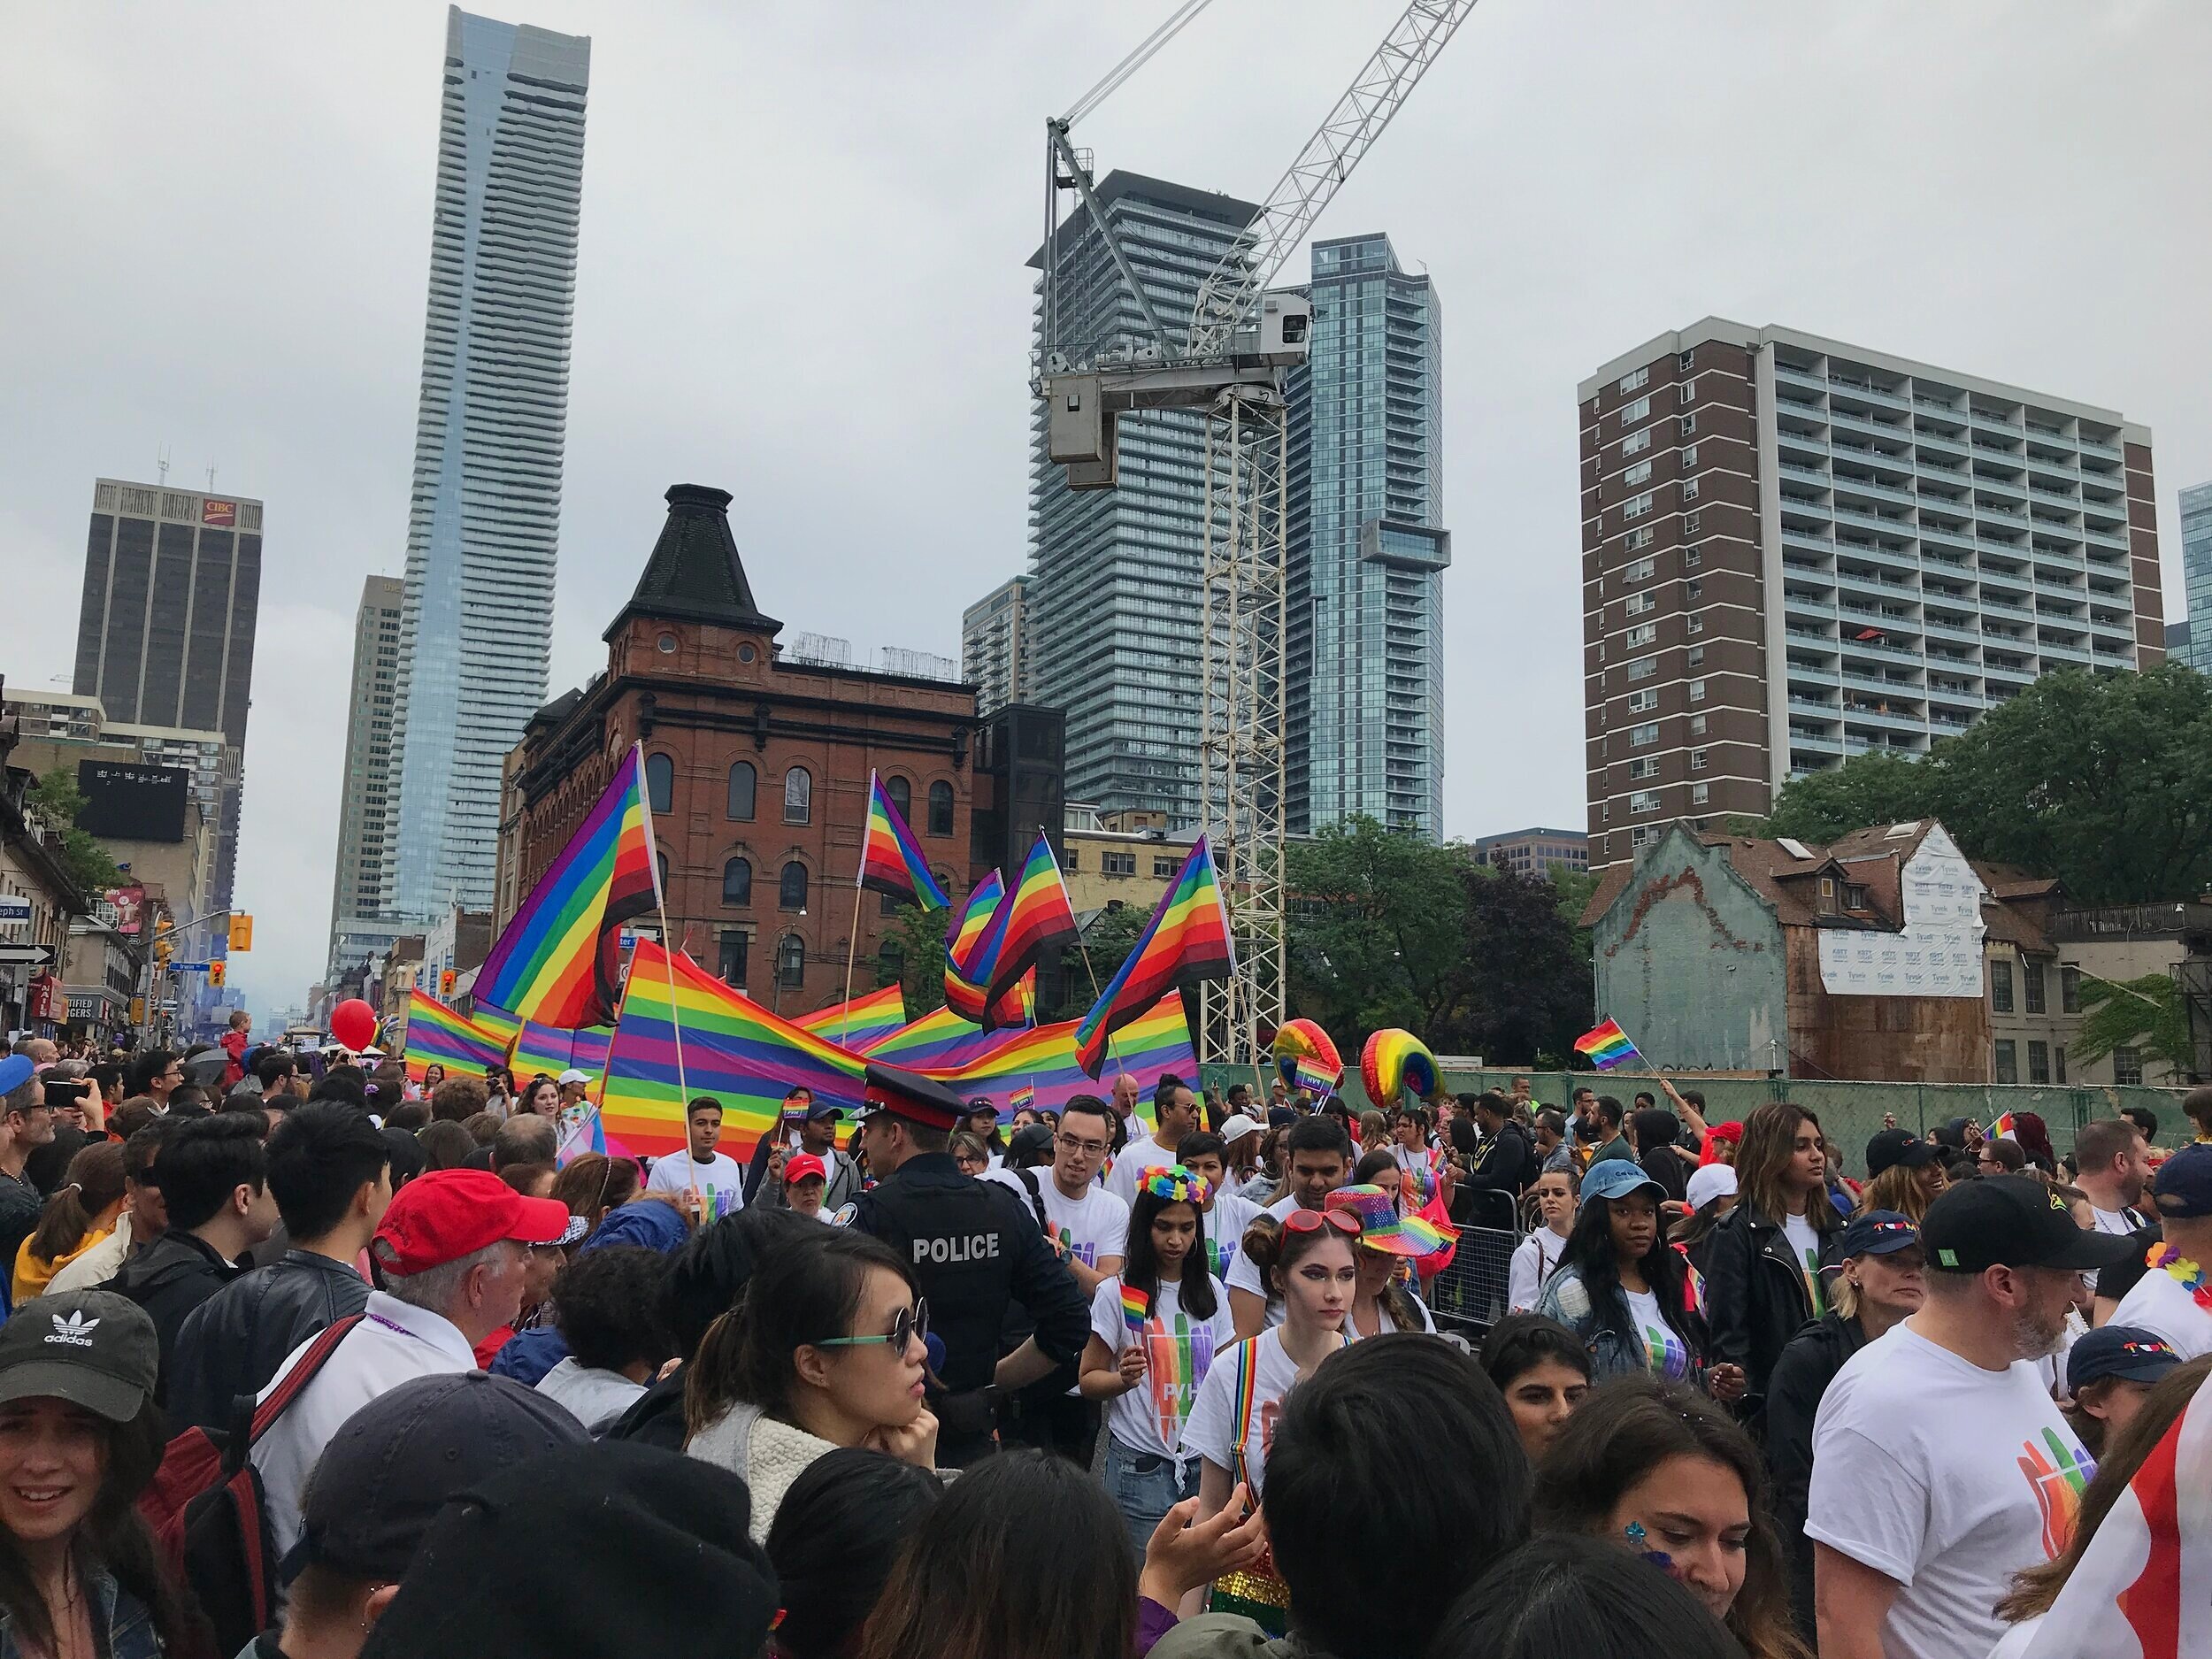 Toronto has the third largest pride festival in the world. 